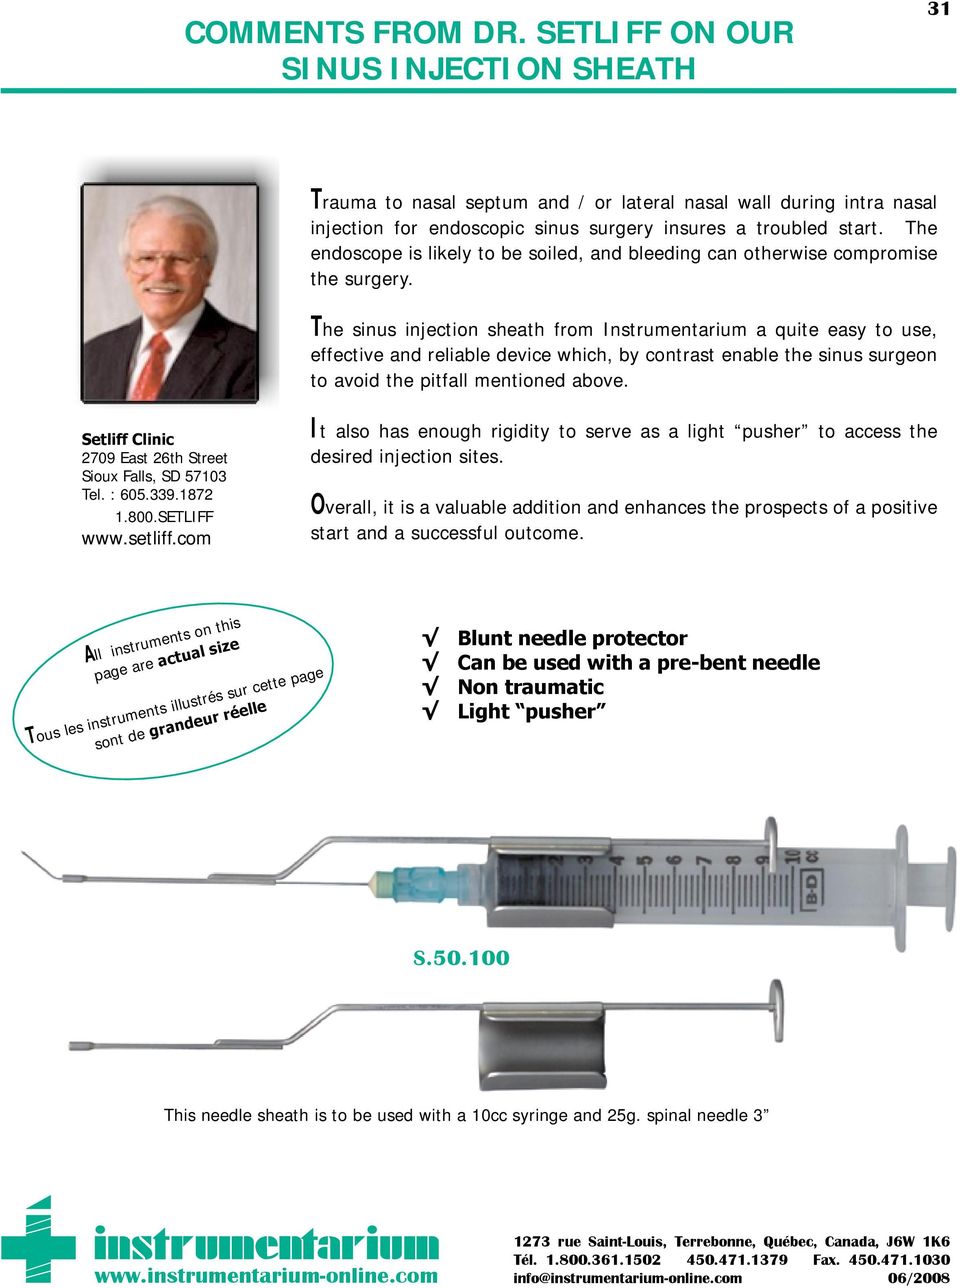 The sinus injection sheath from Instrumentarium a quite easy to use, effective and reliable device which, by contrast enable the sinus surgeon to avoid the pitfall mentioned above.